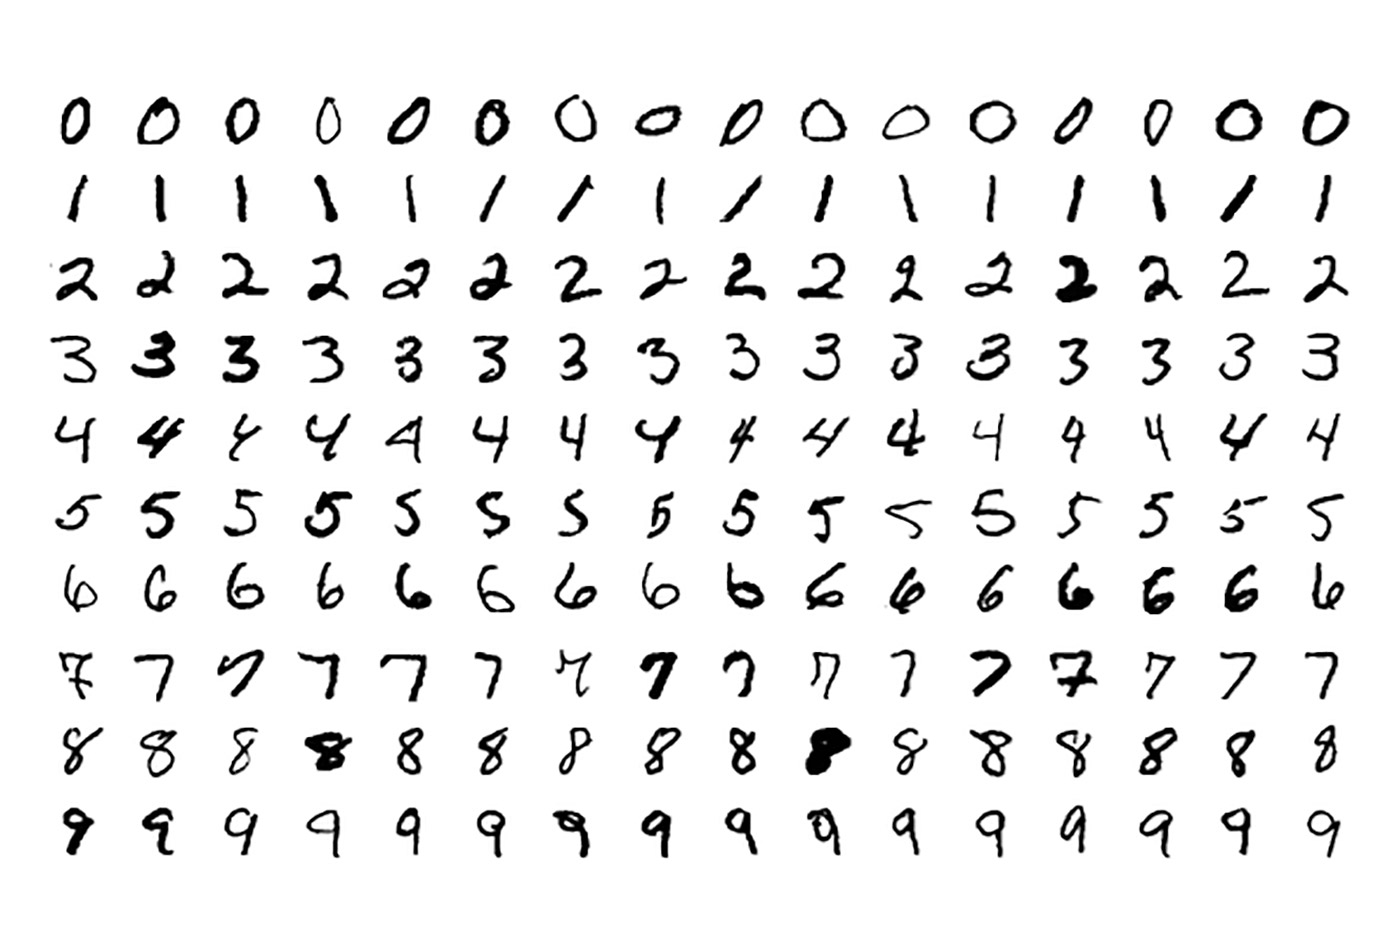 Samples from the MNIST test data set